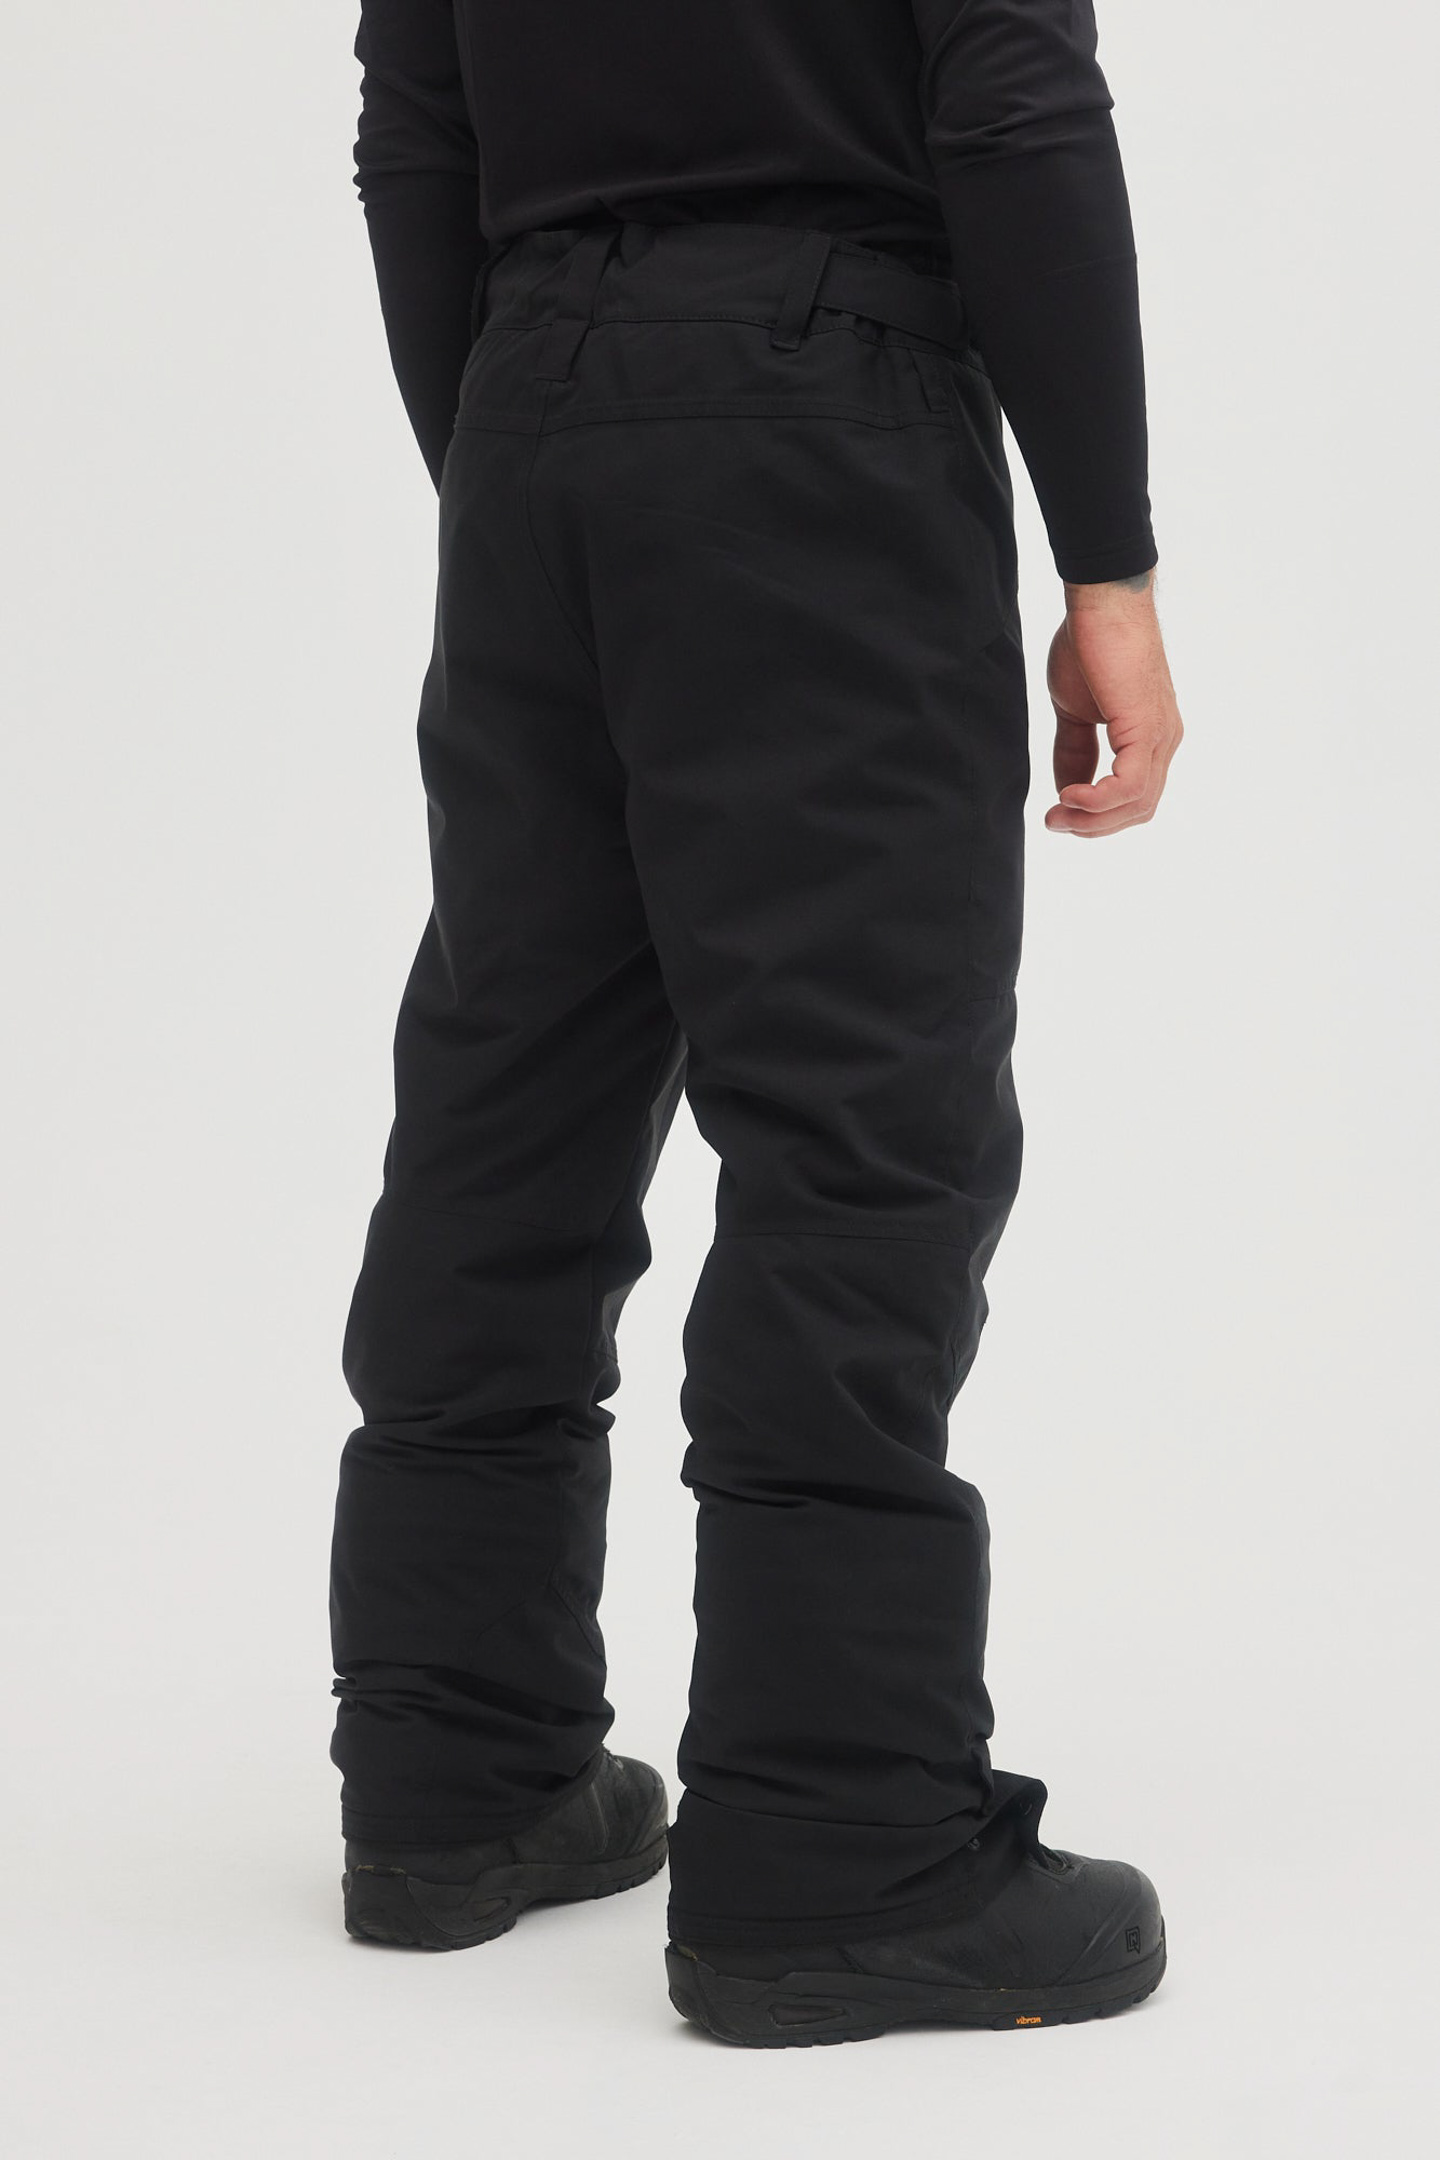 Hammer Insulated Pants - Black Out | O\'Neill | 